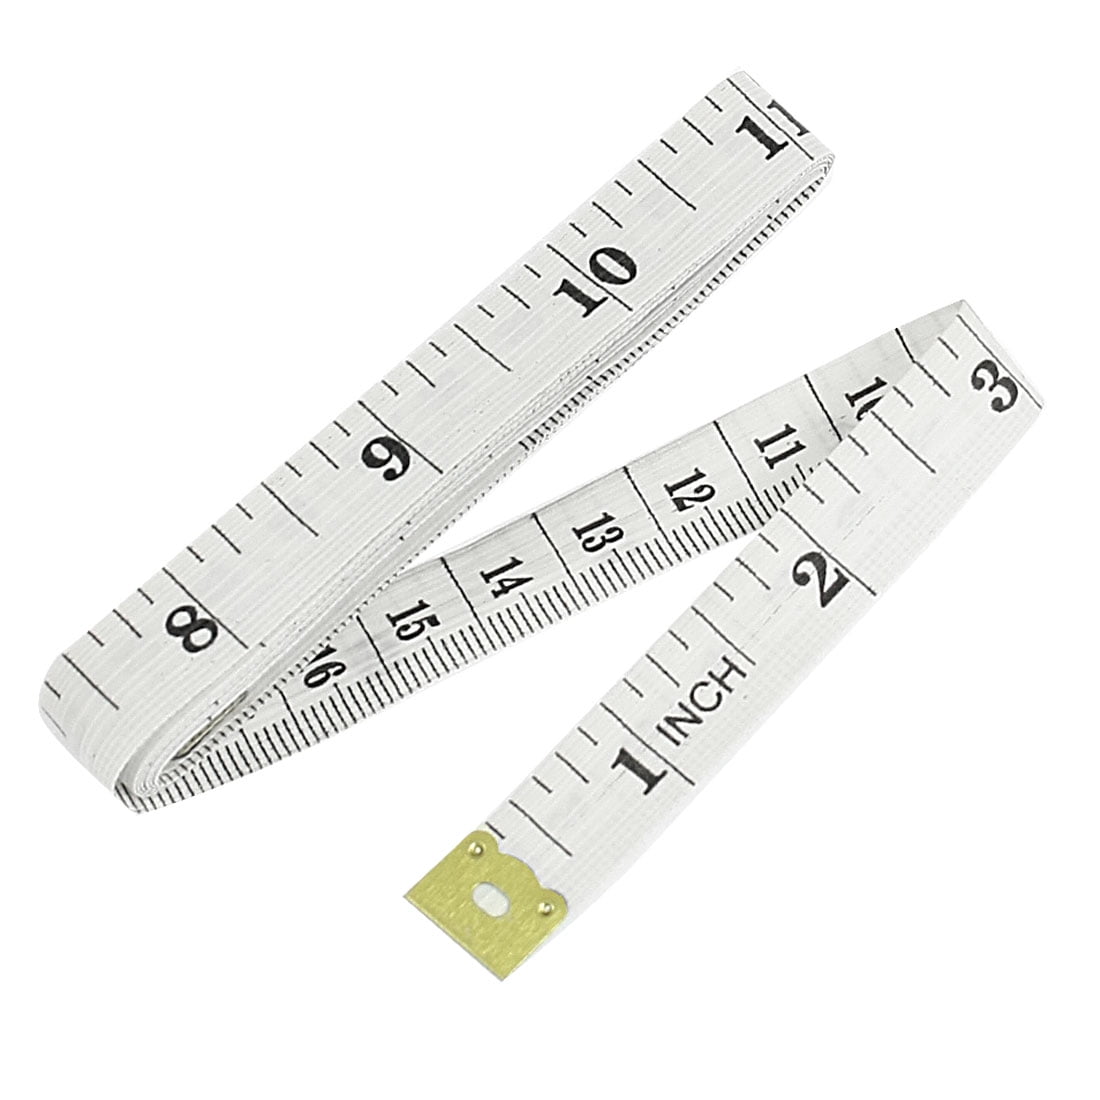 Body Measuring Tape Ruler Sewing Cloth Tailor Measure Soft Flat 150cm Centimeter 